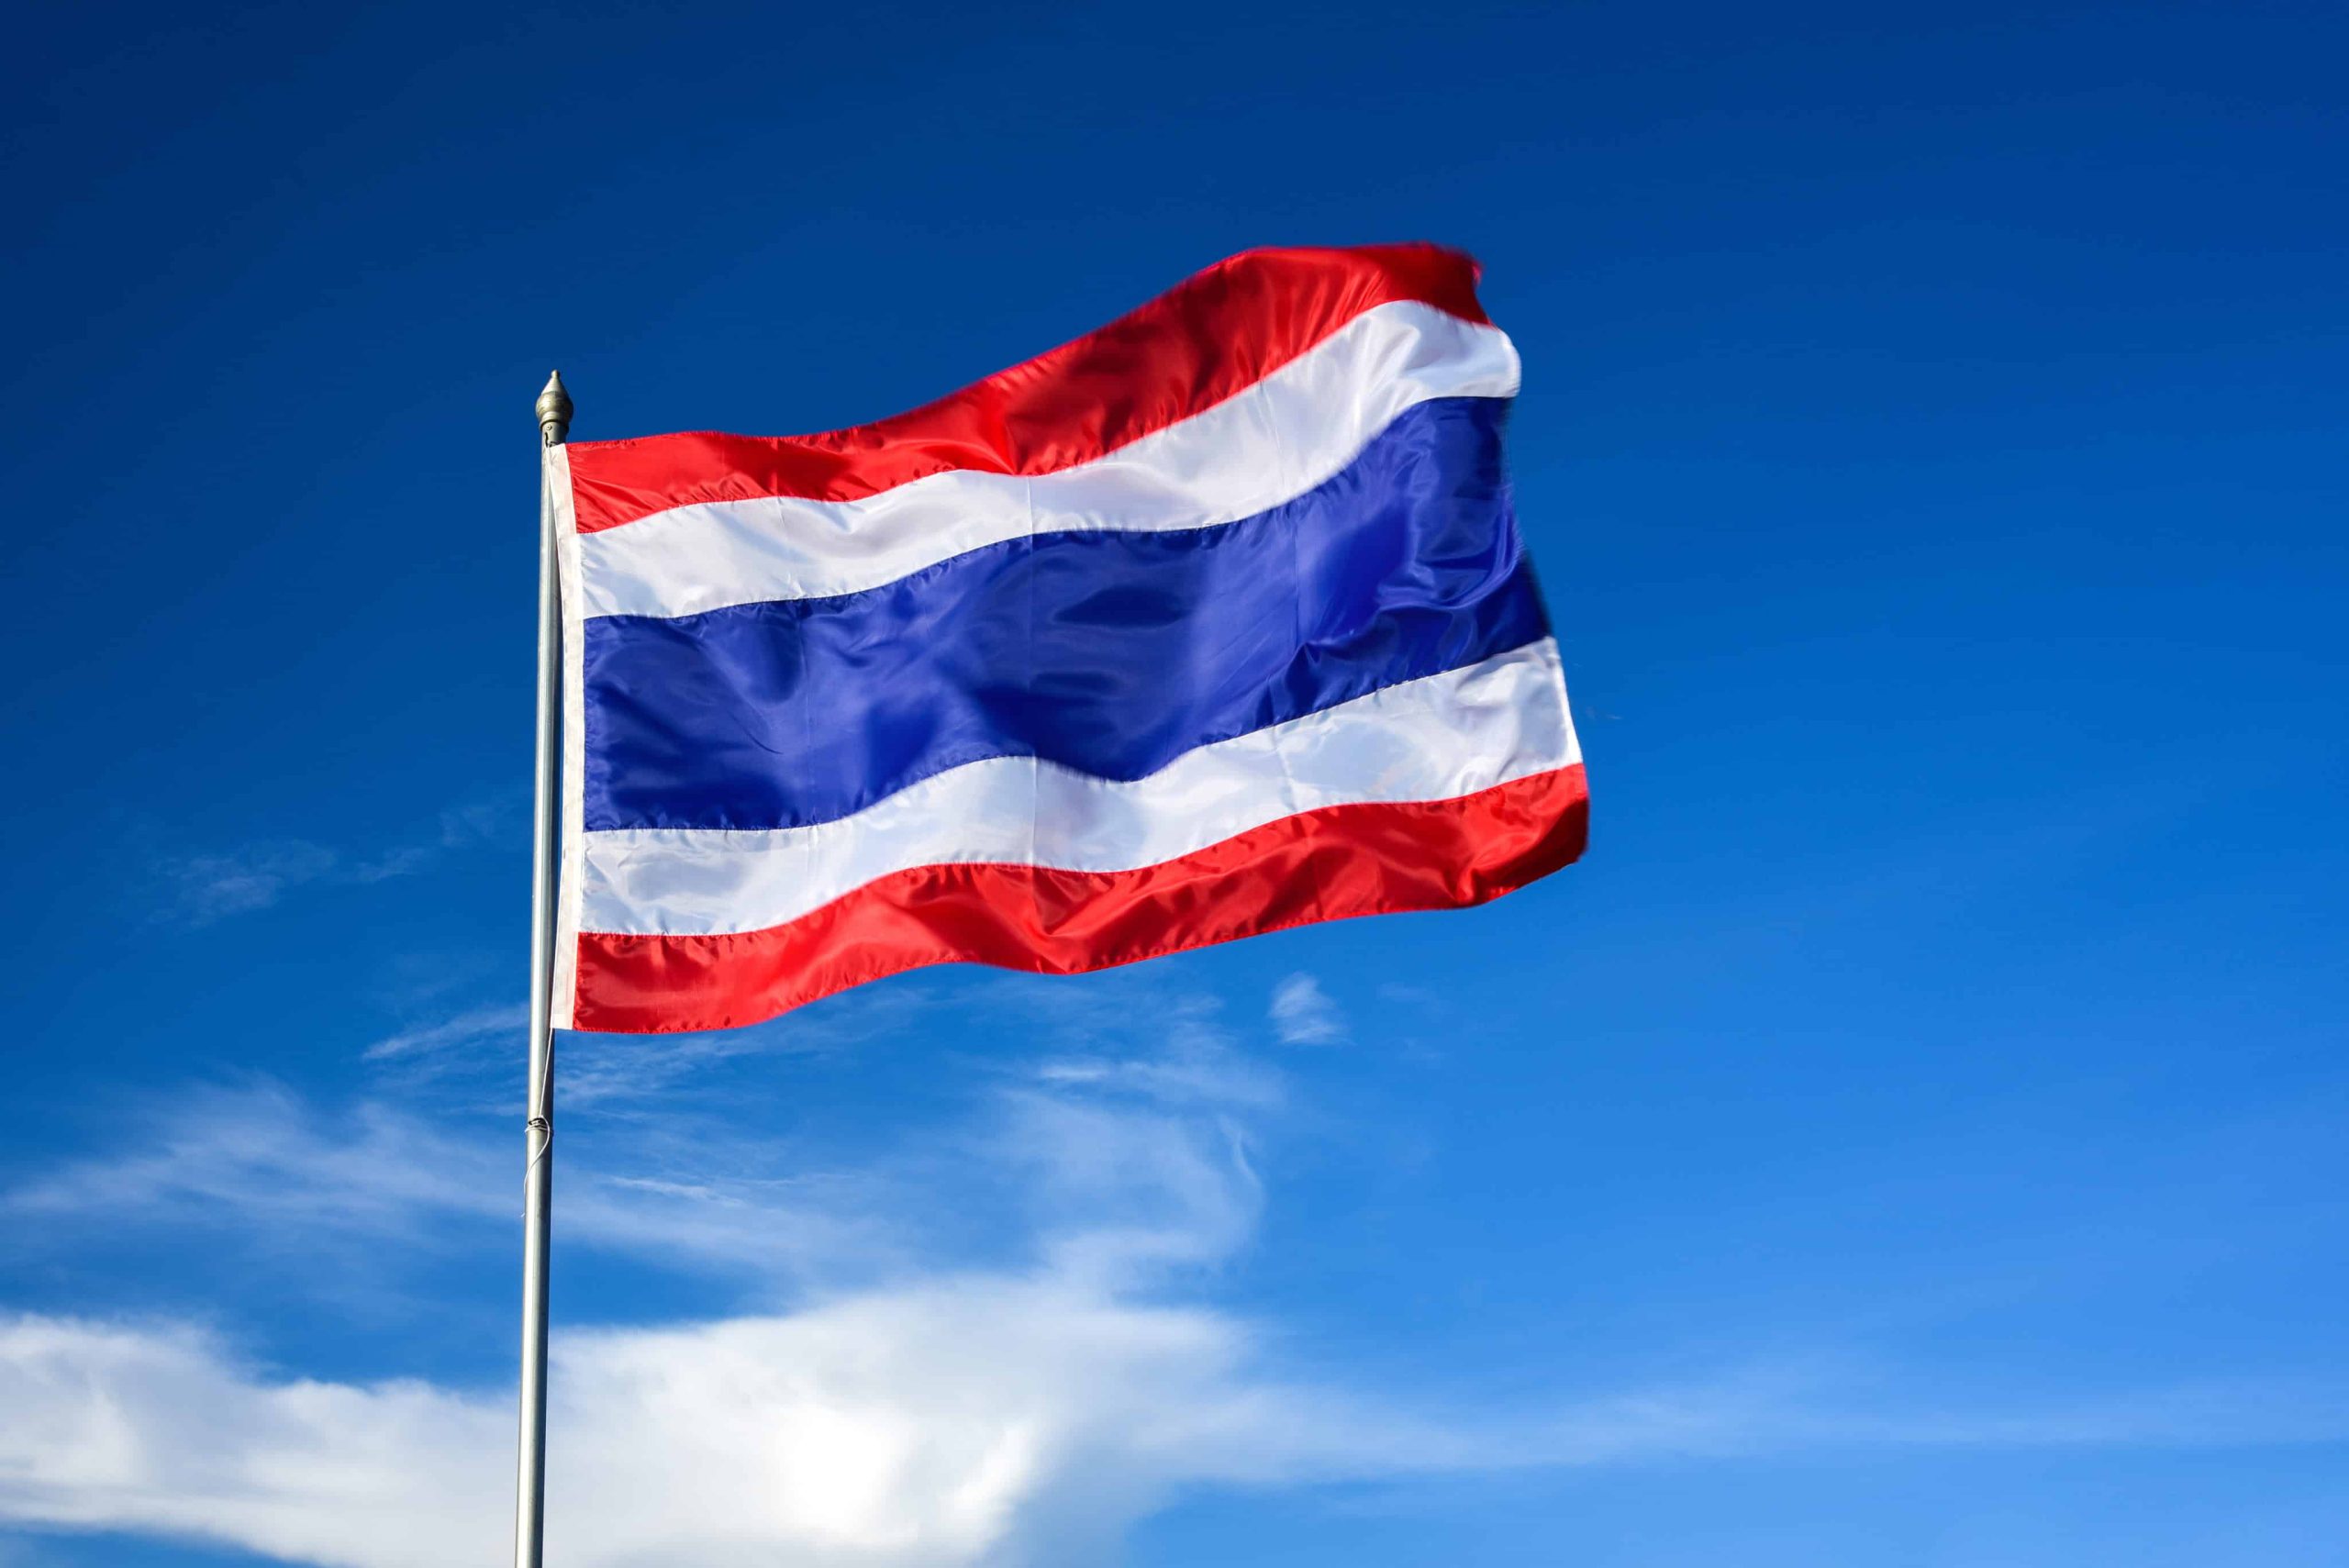 Over 850 Doctors in Thailand Protest Pot Legalization